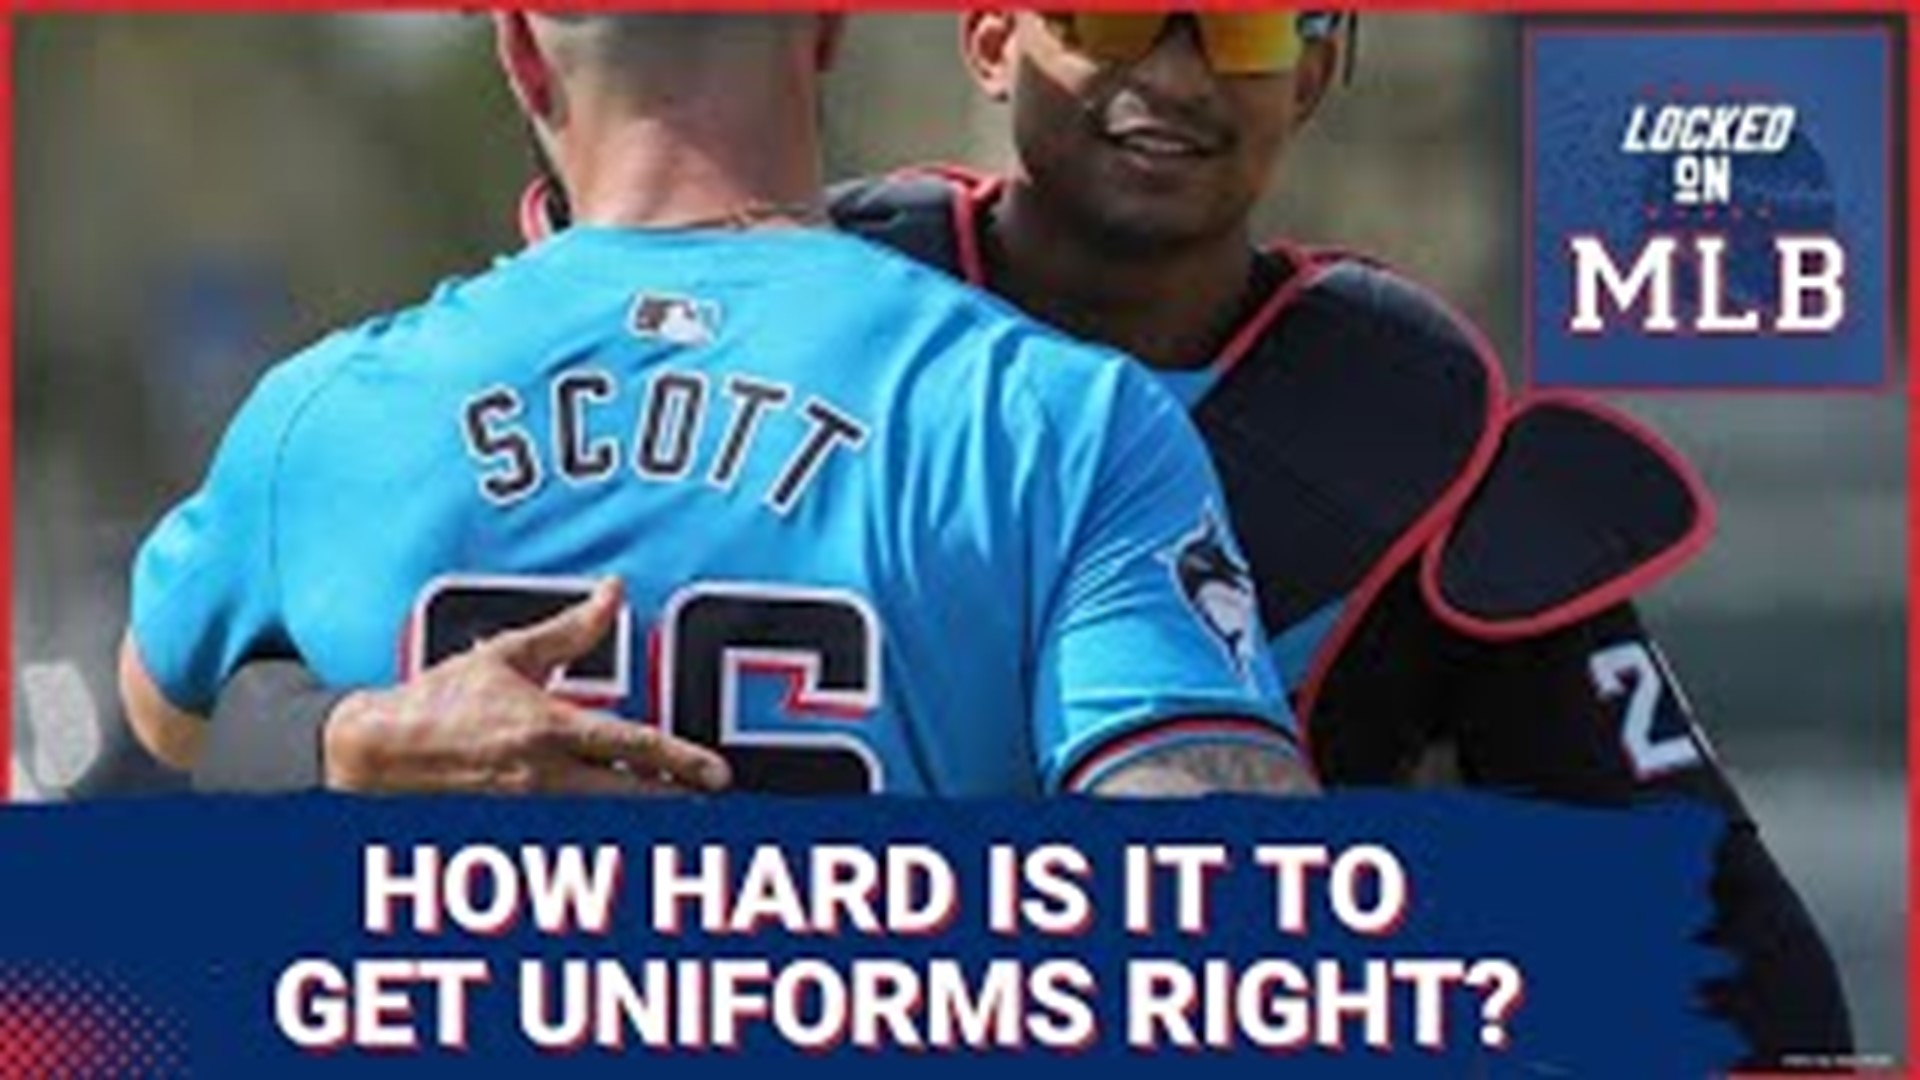 The new uniforms that baseball issuing this year look cheap. One player called them TJ Maxx Knock Offs. Why can't baseball understand the importance of nice uniforms